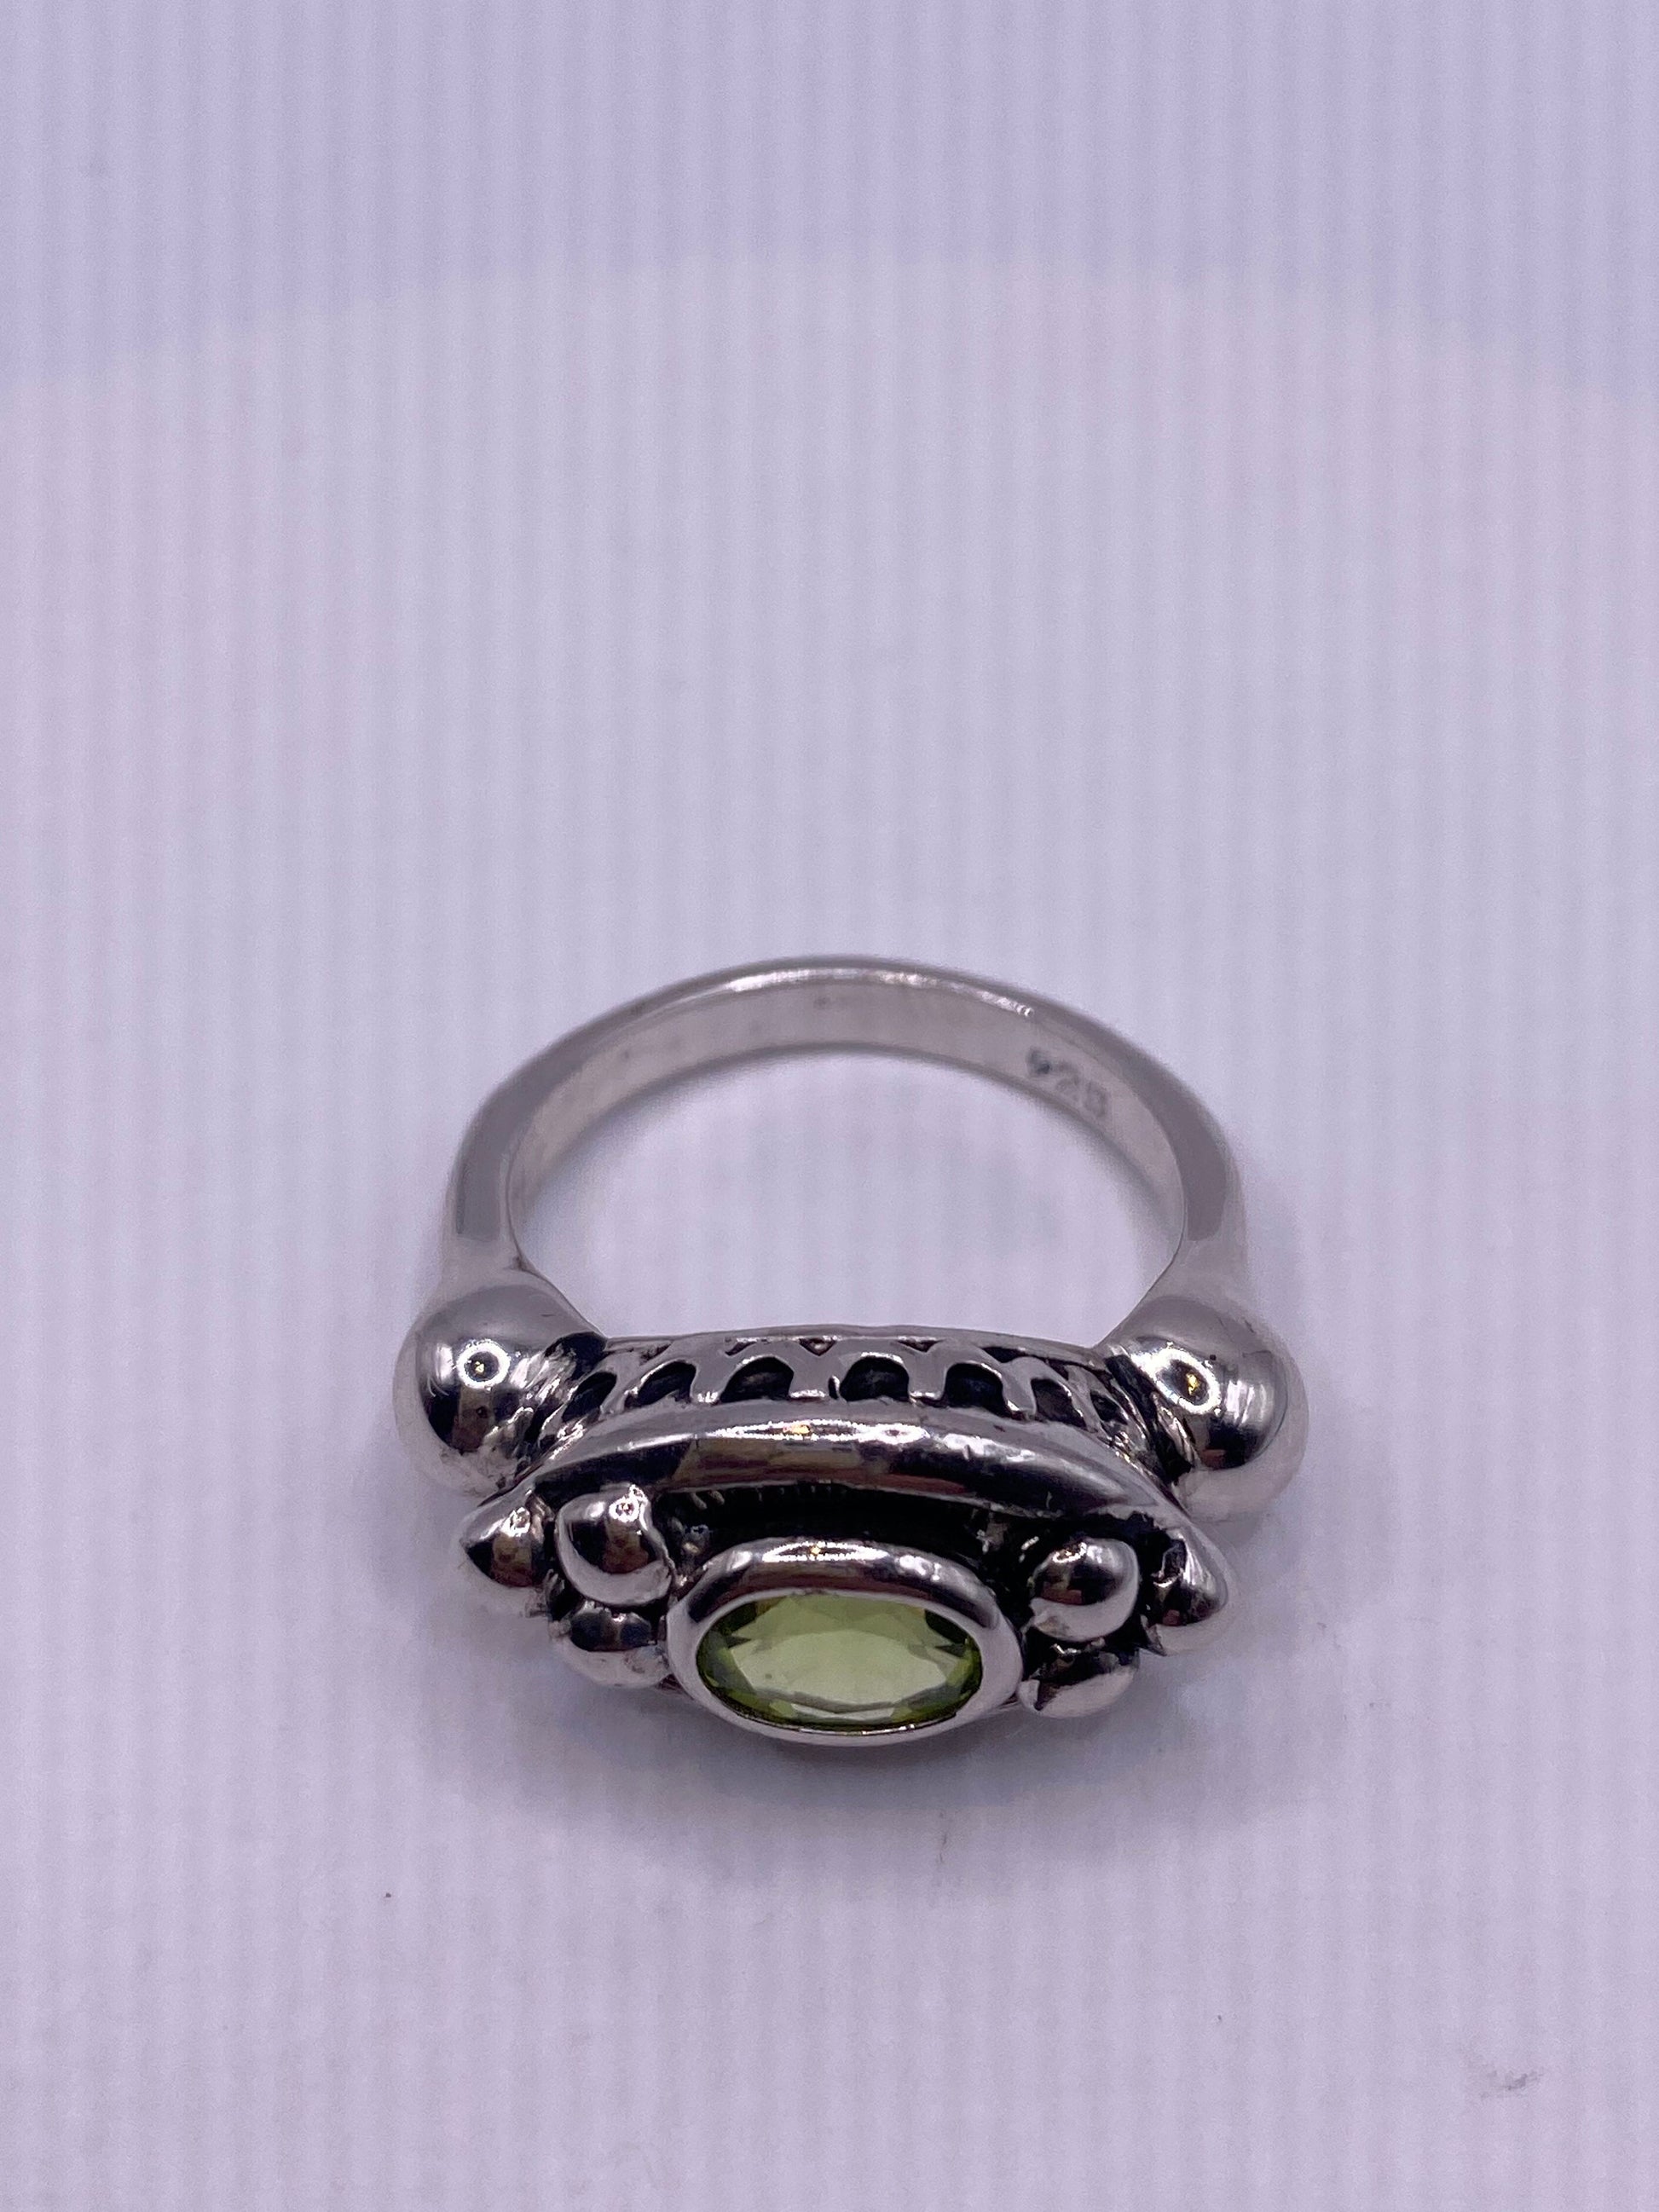 Vintage Green Peridot Filigree 925 Sterling Silver Cocktail Ring